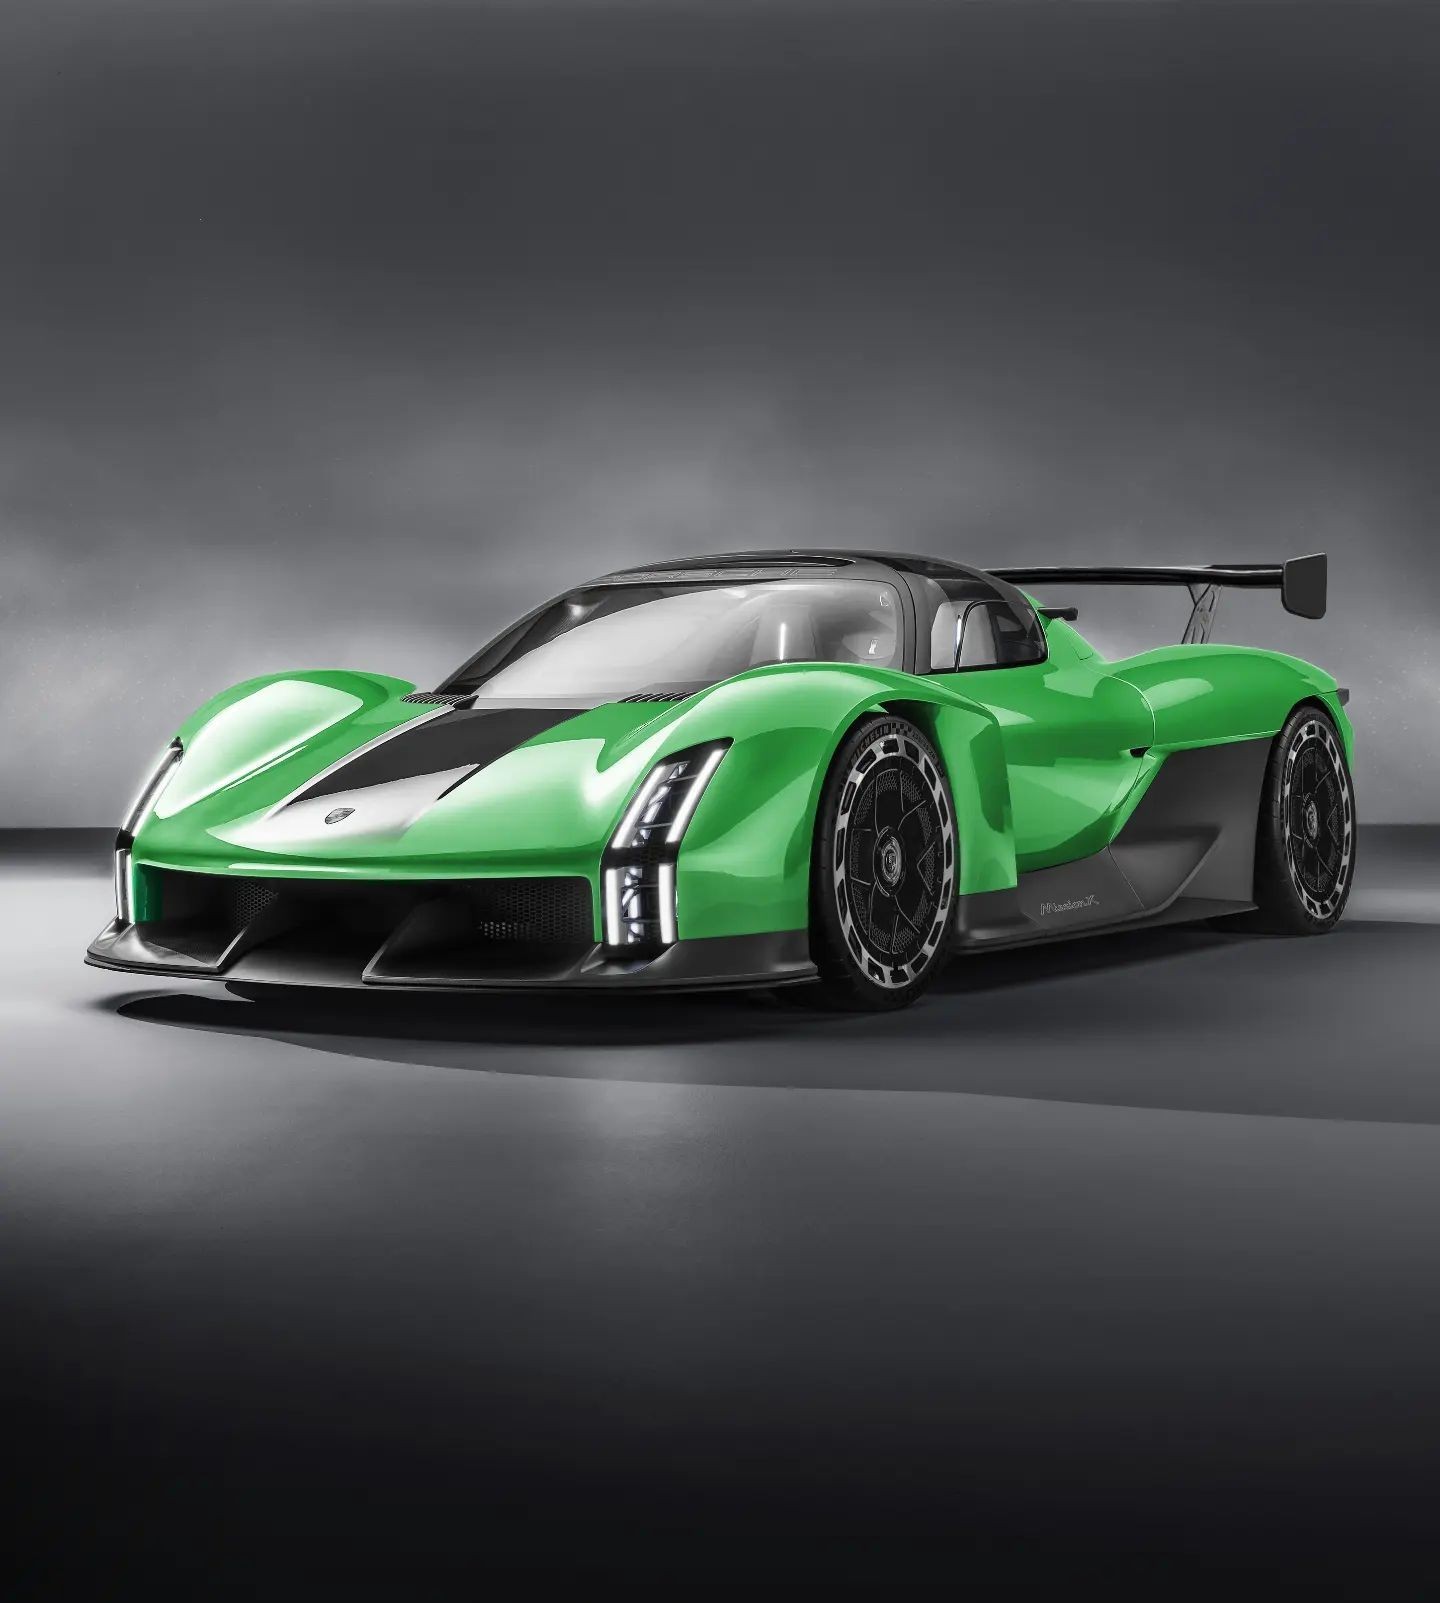 https://s1.cdn.autoevolution.com/images/news/gallery/would-the-porsche-mission-x-look-even-better-in-green-and-with-aftermarket-wheels_1.jpg